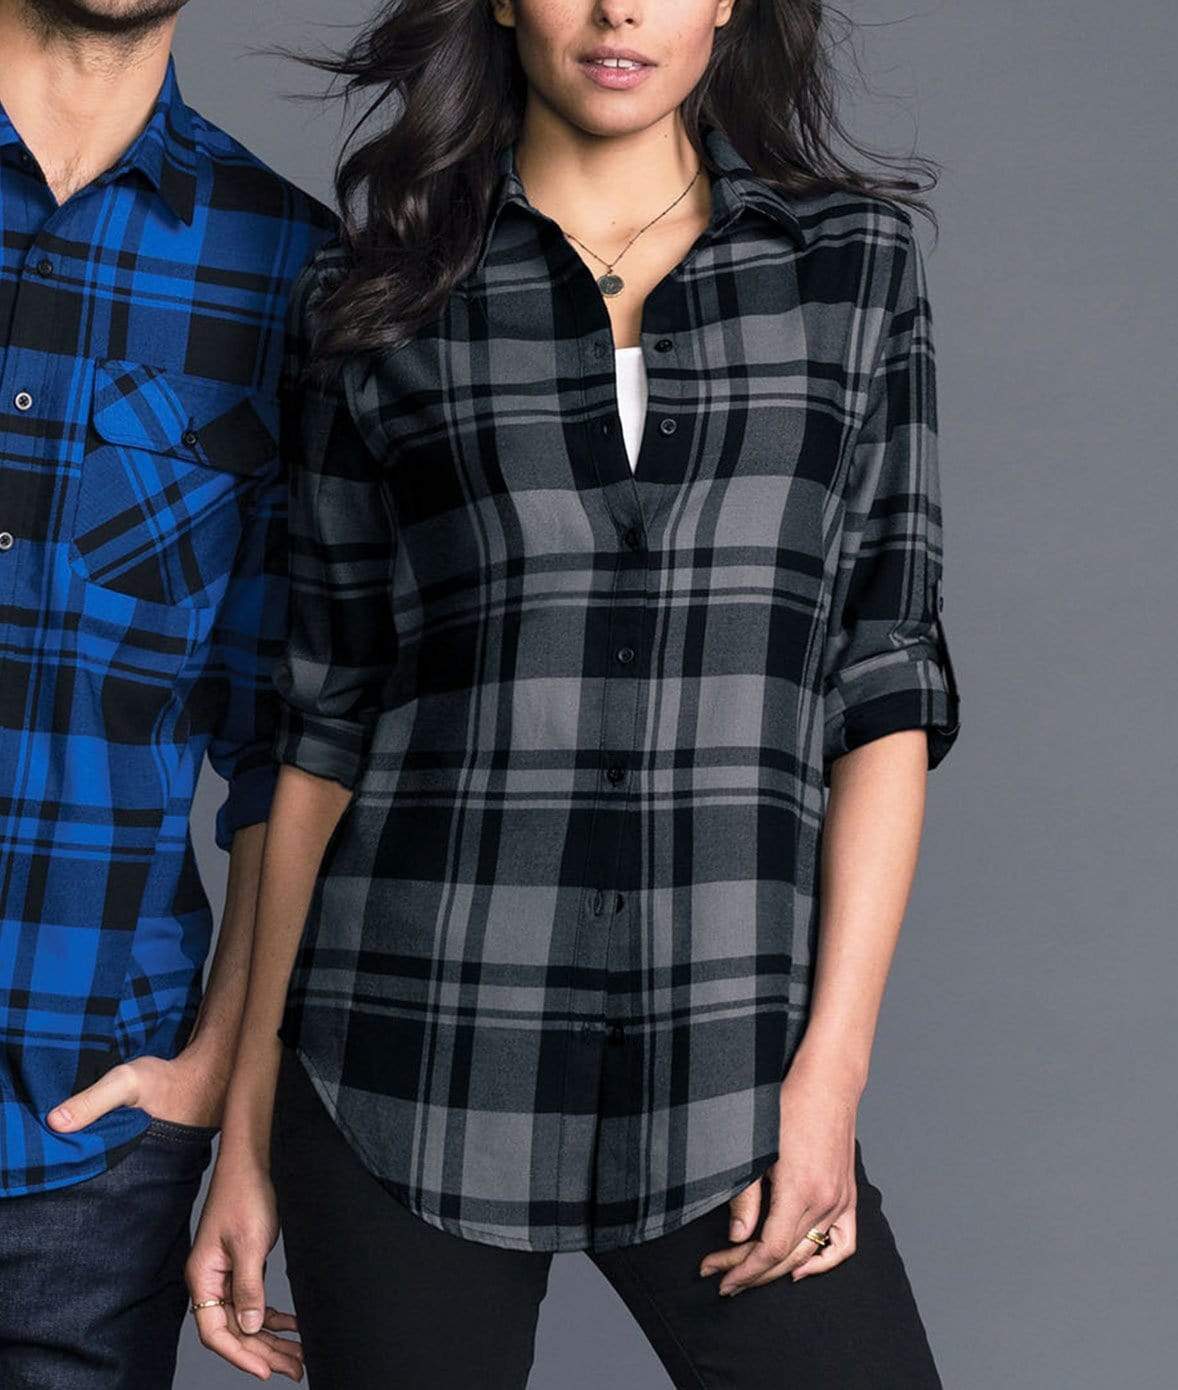 Nayked Apparel Women Women's Ridiculously Soft Plaid Flannel Tunic Shirt